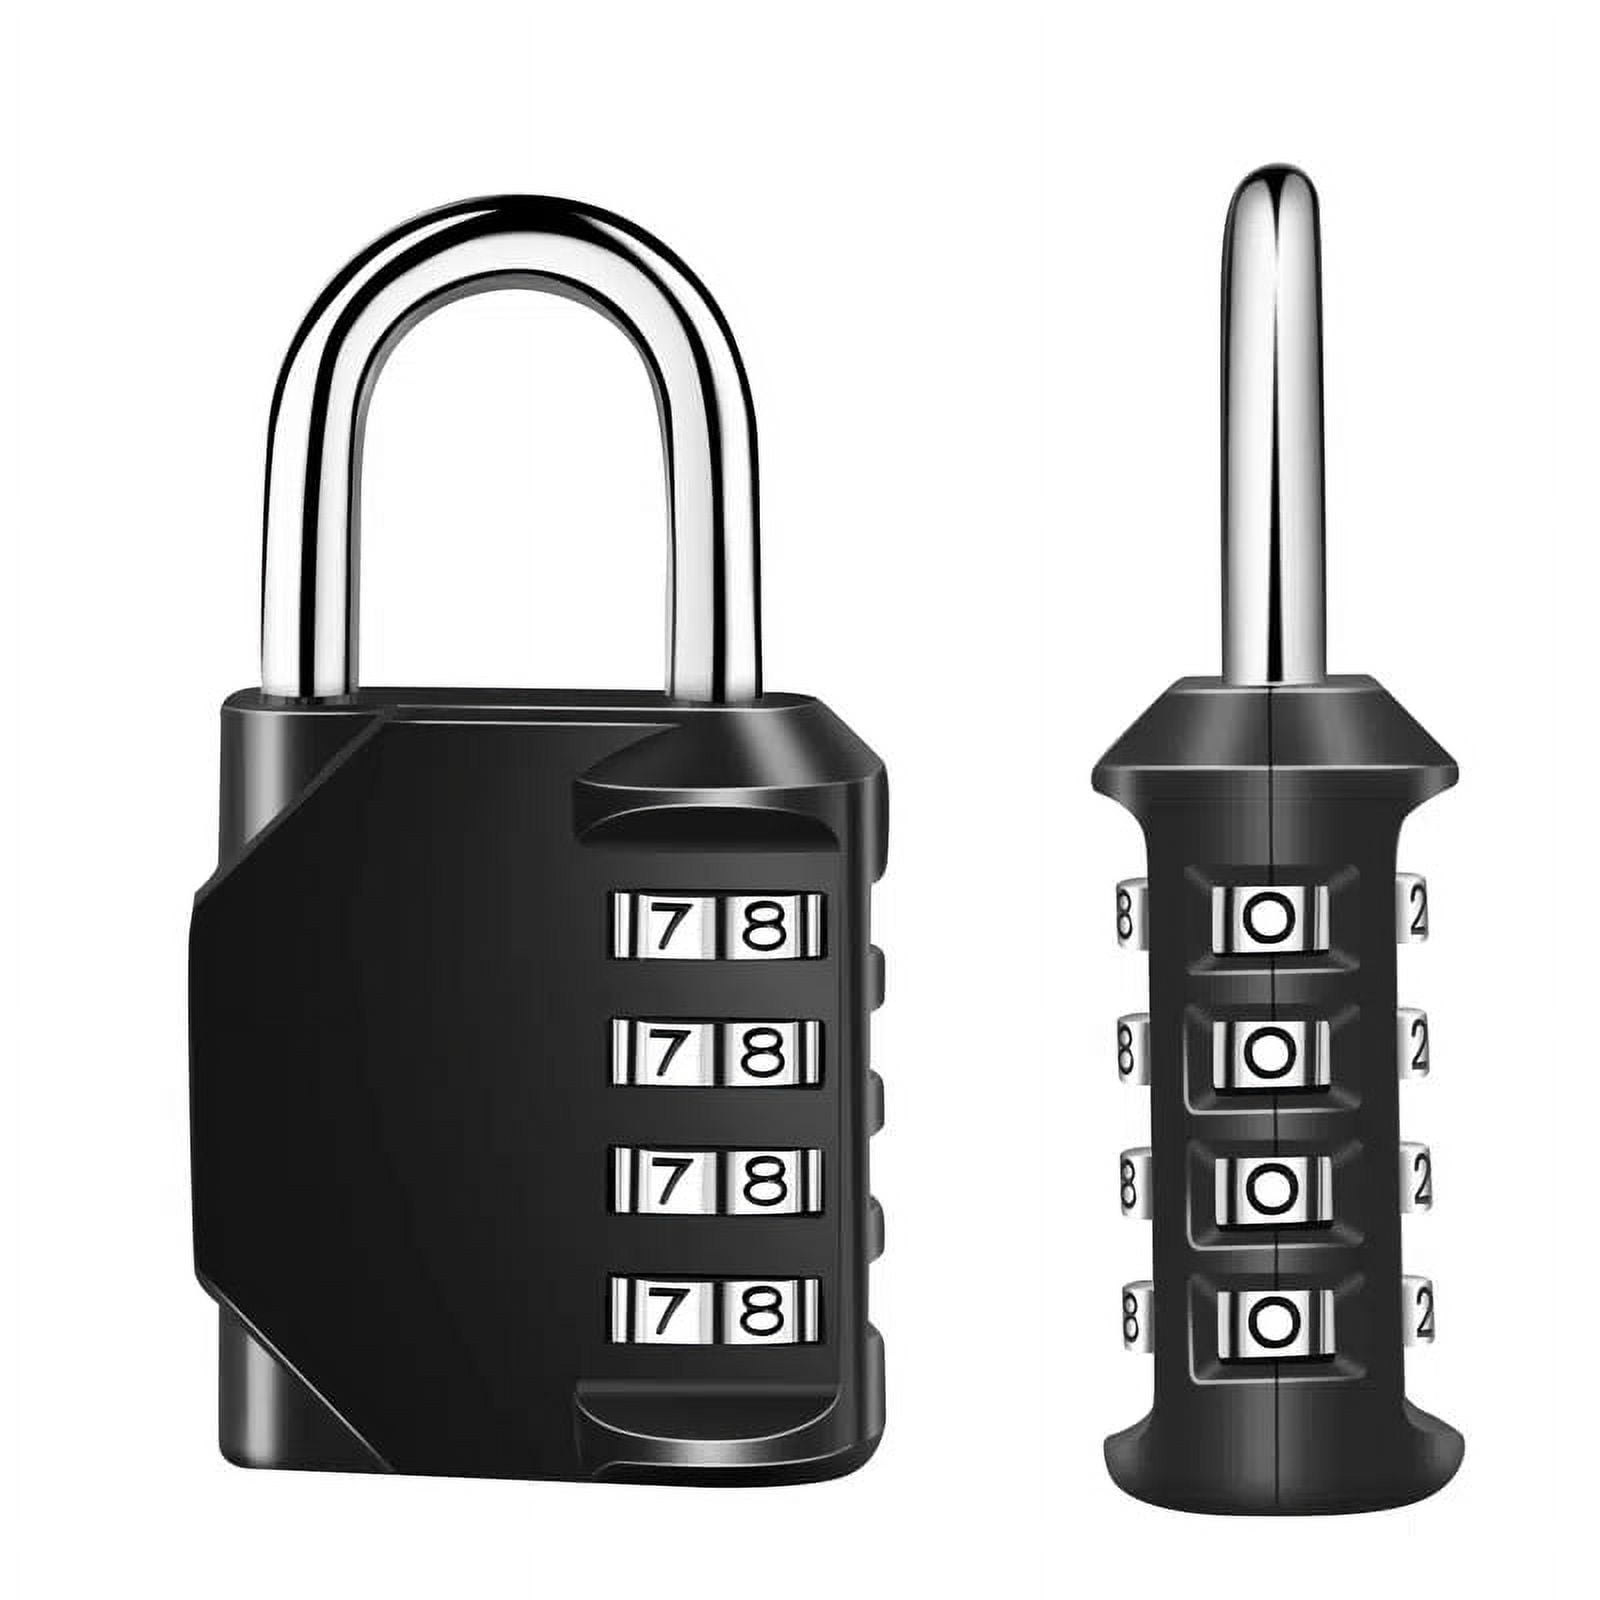 Newhouse Hardware Improved 4-Digit Combination Lock, Outdoor Waterproof  Padlock for School, Gym Locker, Sports Locker, Fence, Toolbox, Gate, and  Travel, Customizable 4-Digit Lock Combo